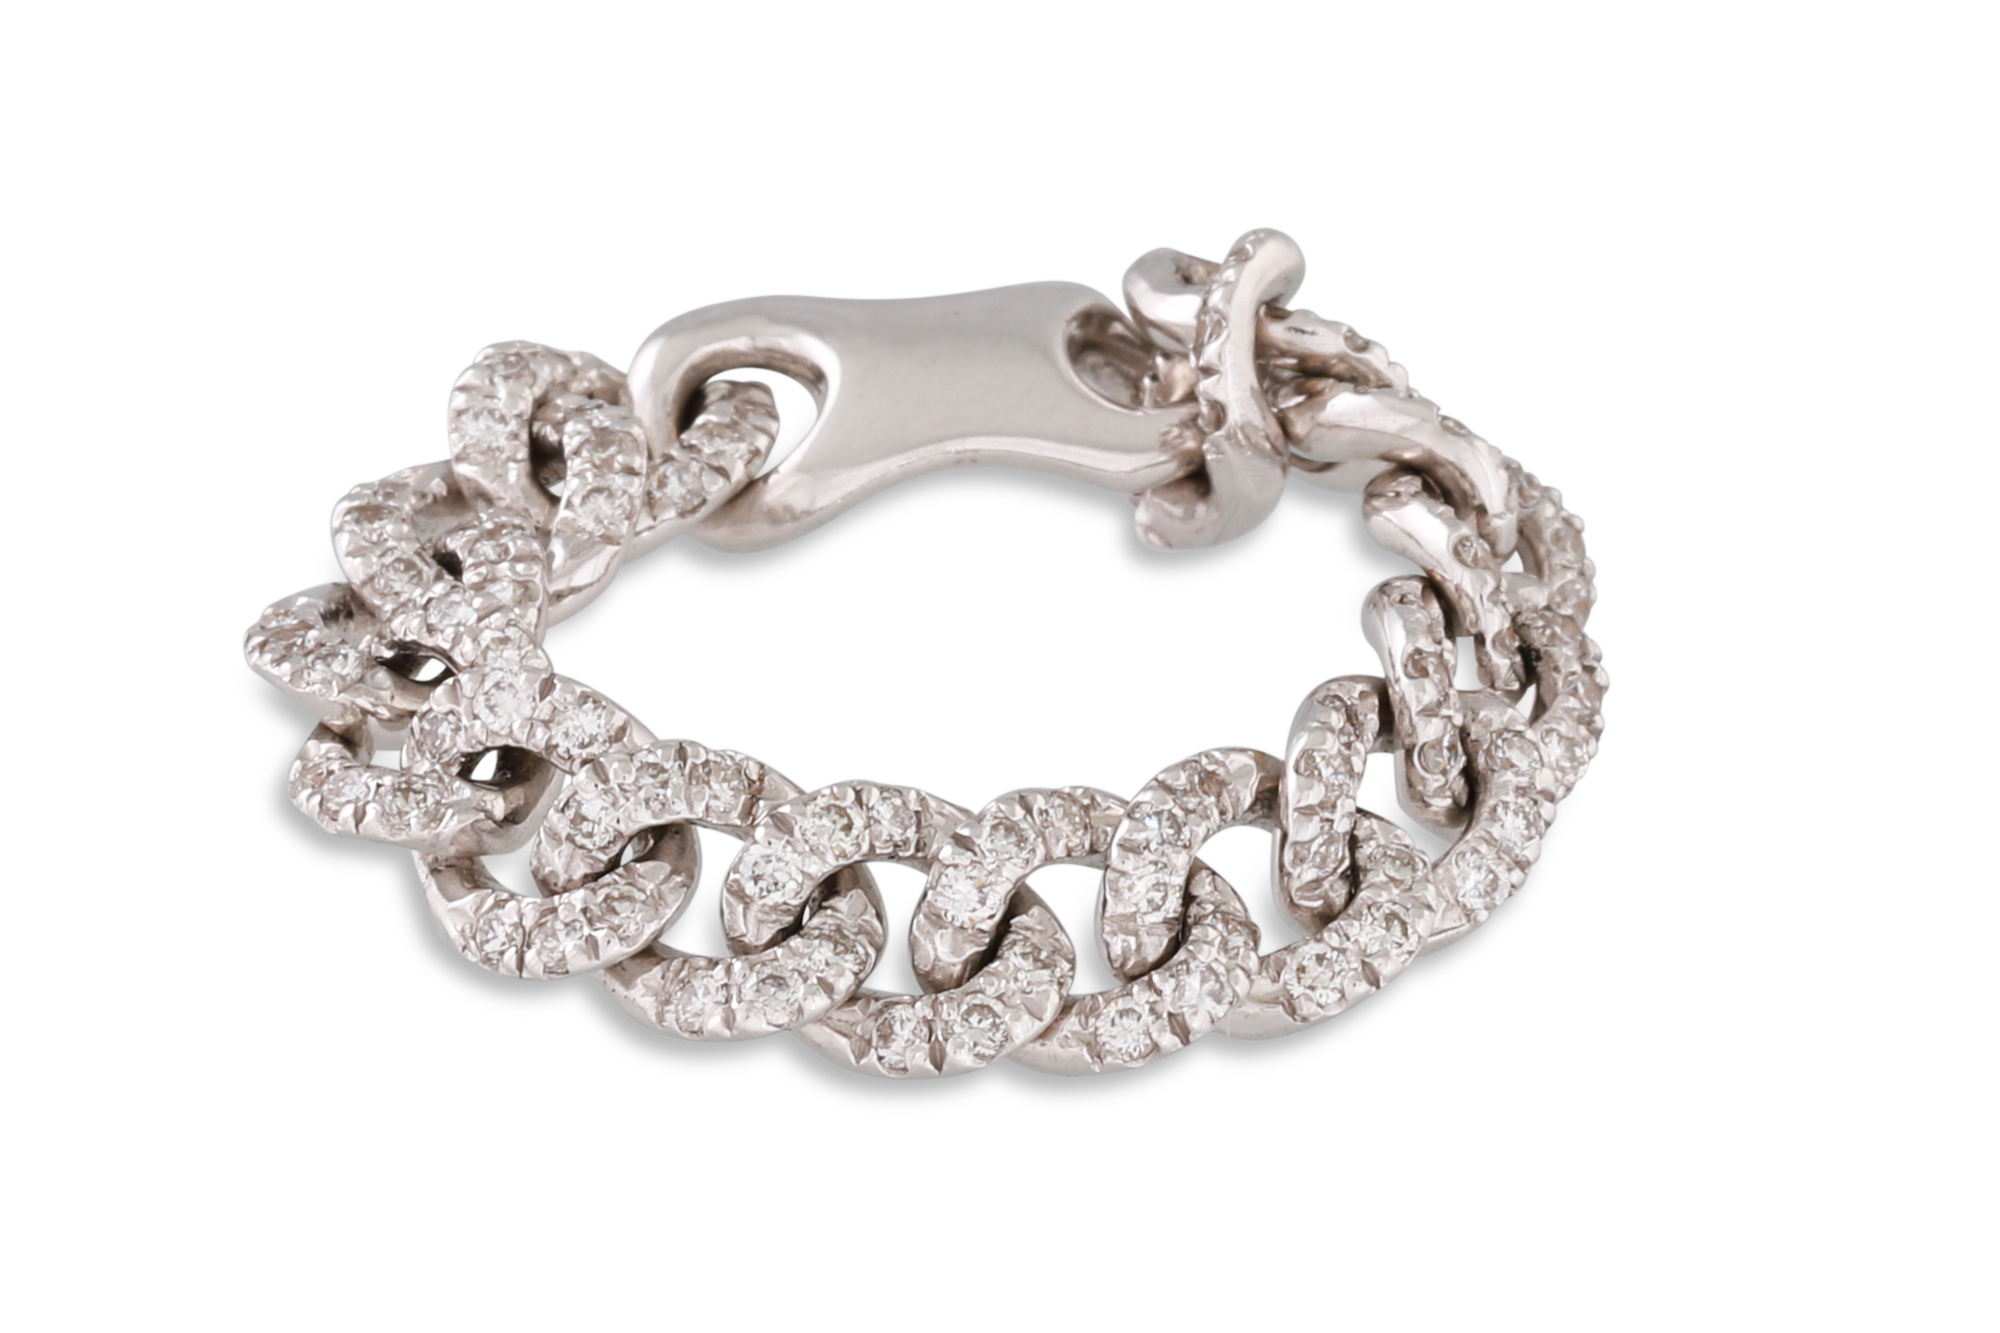 A DIAMOND SET CURB LINK RING, the flexible design in 18ct white gold. Estimated: weight of diamonds: